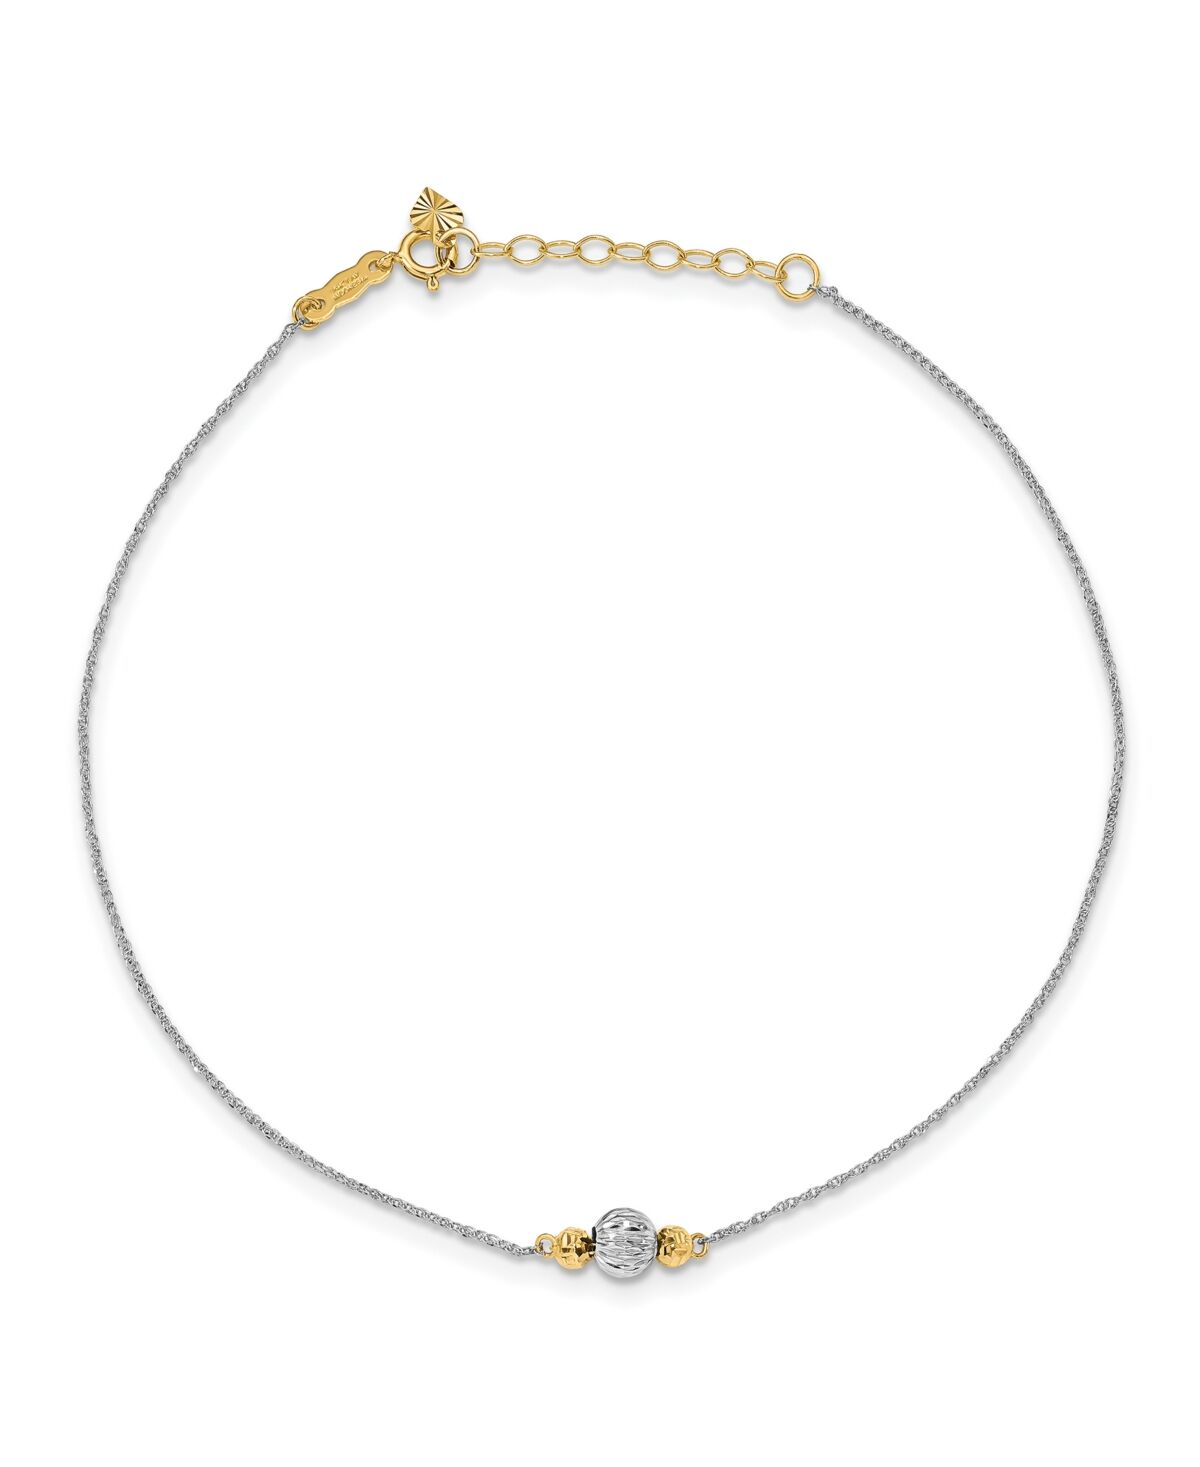 Macy's Bead Ropa Chain Anklet in 14k White and Yellow Gold - Tt Gold